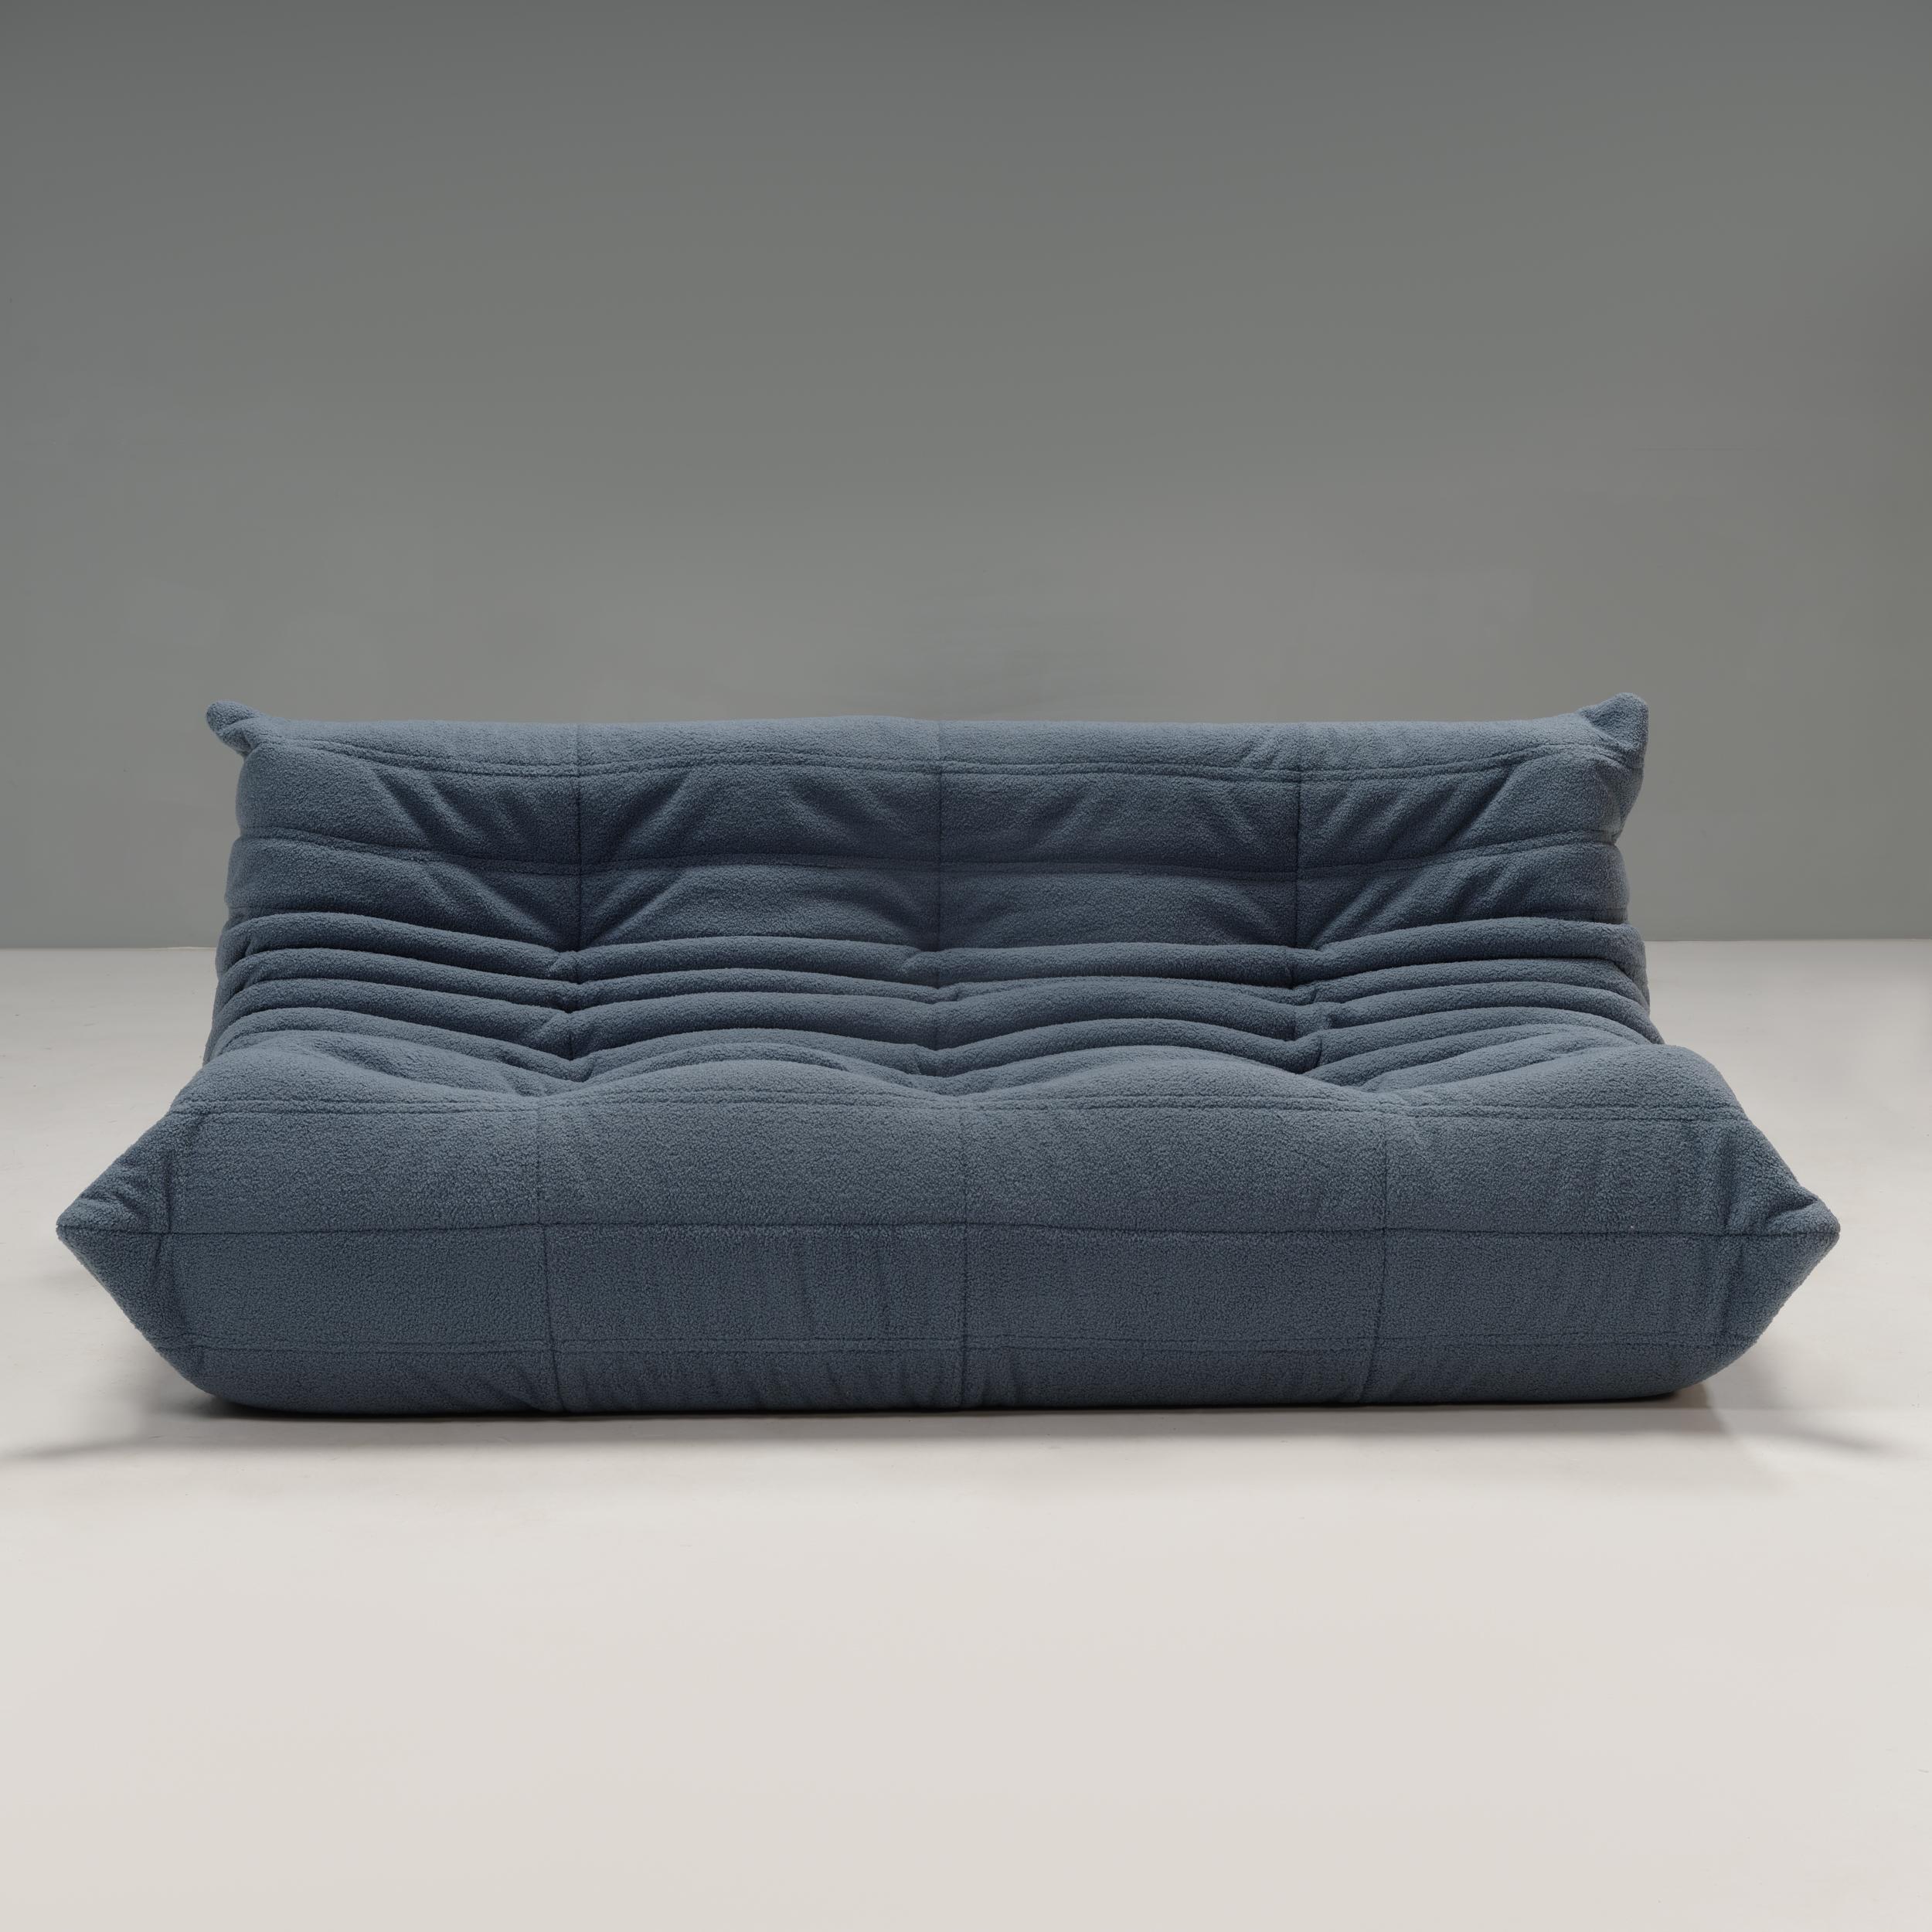 The iconic Togo sofa, originally designed by Michel Ducaroy for Ligne Roset in 1973, has become a design classic. 

This three-seater sofa has been newly reupholstered in extra soft blue bouclé fabric and features the instantly recognisable